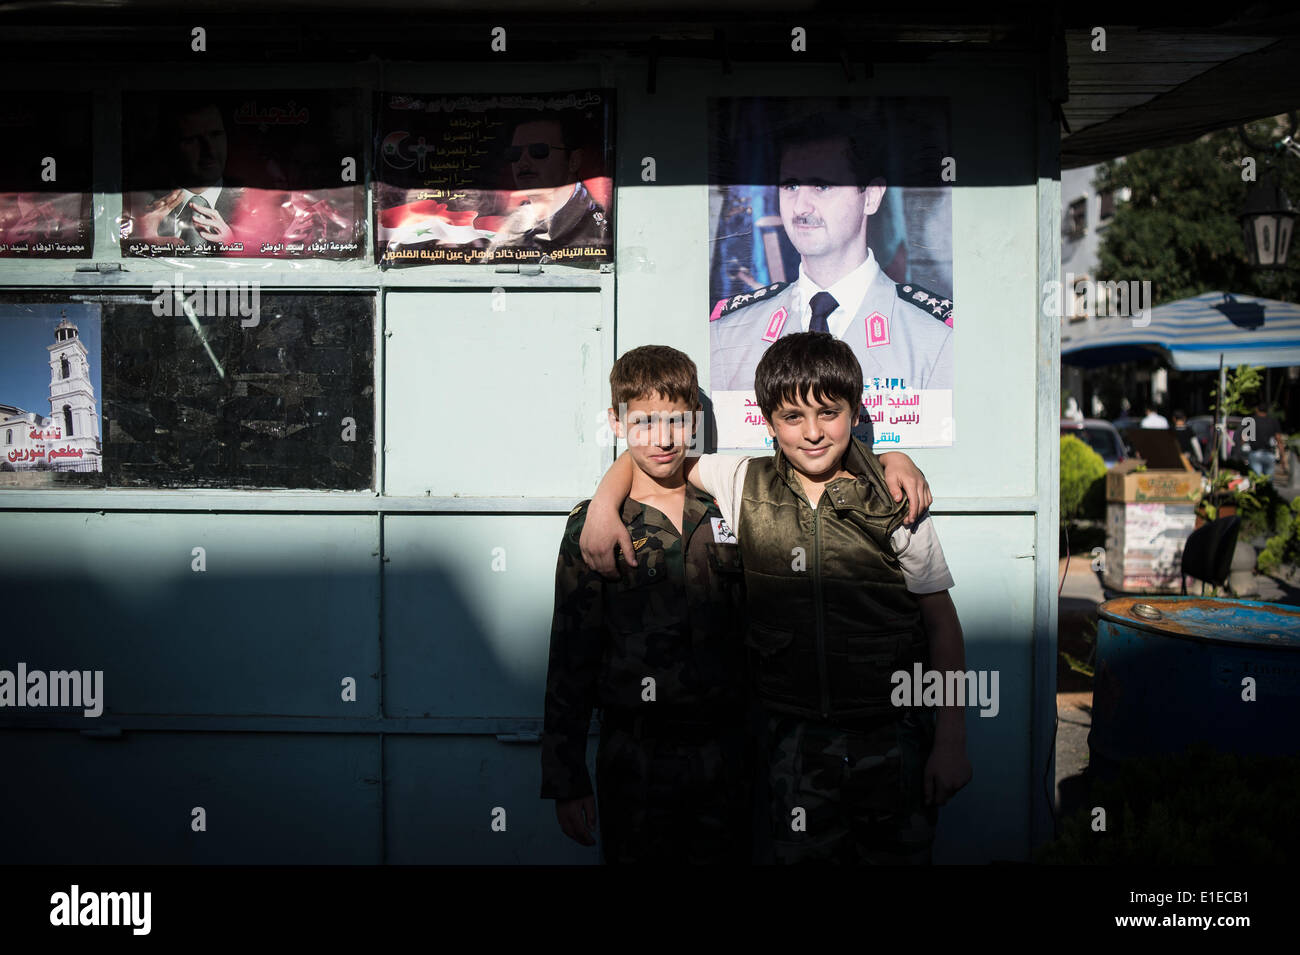 (140602) -- DAMASCUS, June 2, 2014 (Xinhua) --   Syrian boys pose in front of a poster of presidential candidate Bashar al-Assad in Damascus, capital of Syria, on June 1, 2014, ahead of the presidential election on June 3. (Xinhua/Pan Chaoyue) Stock Photo